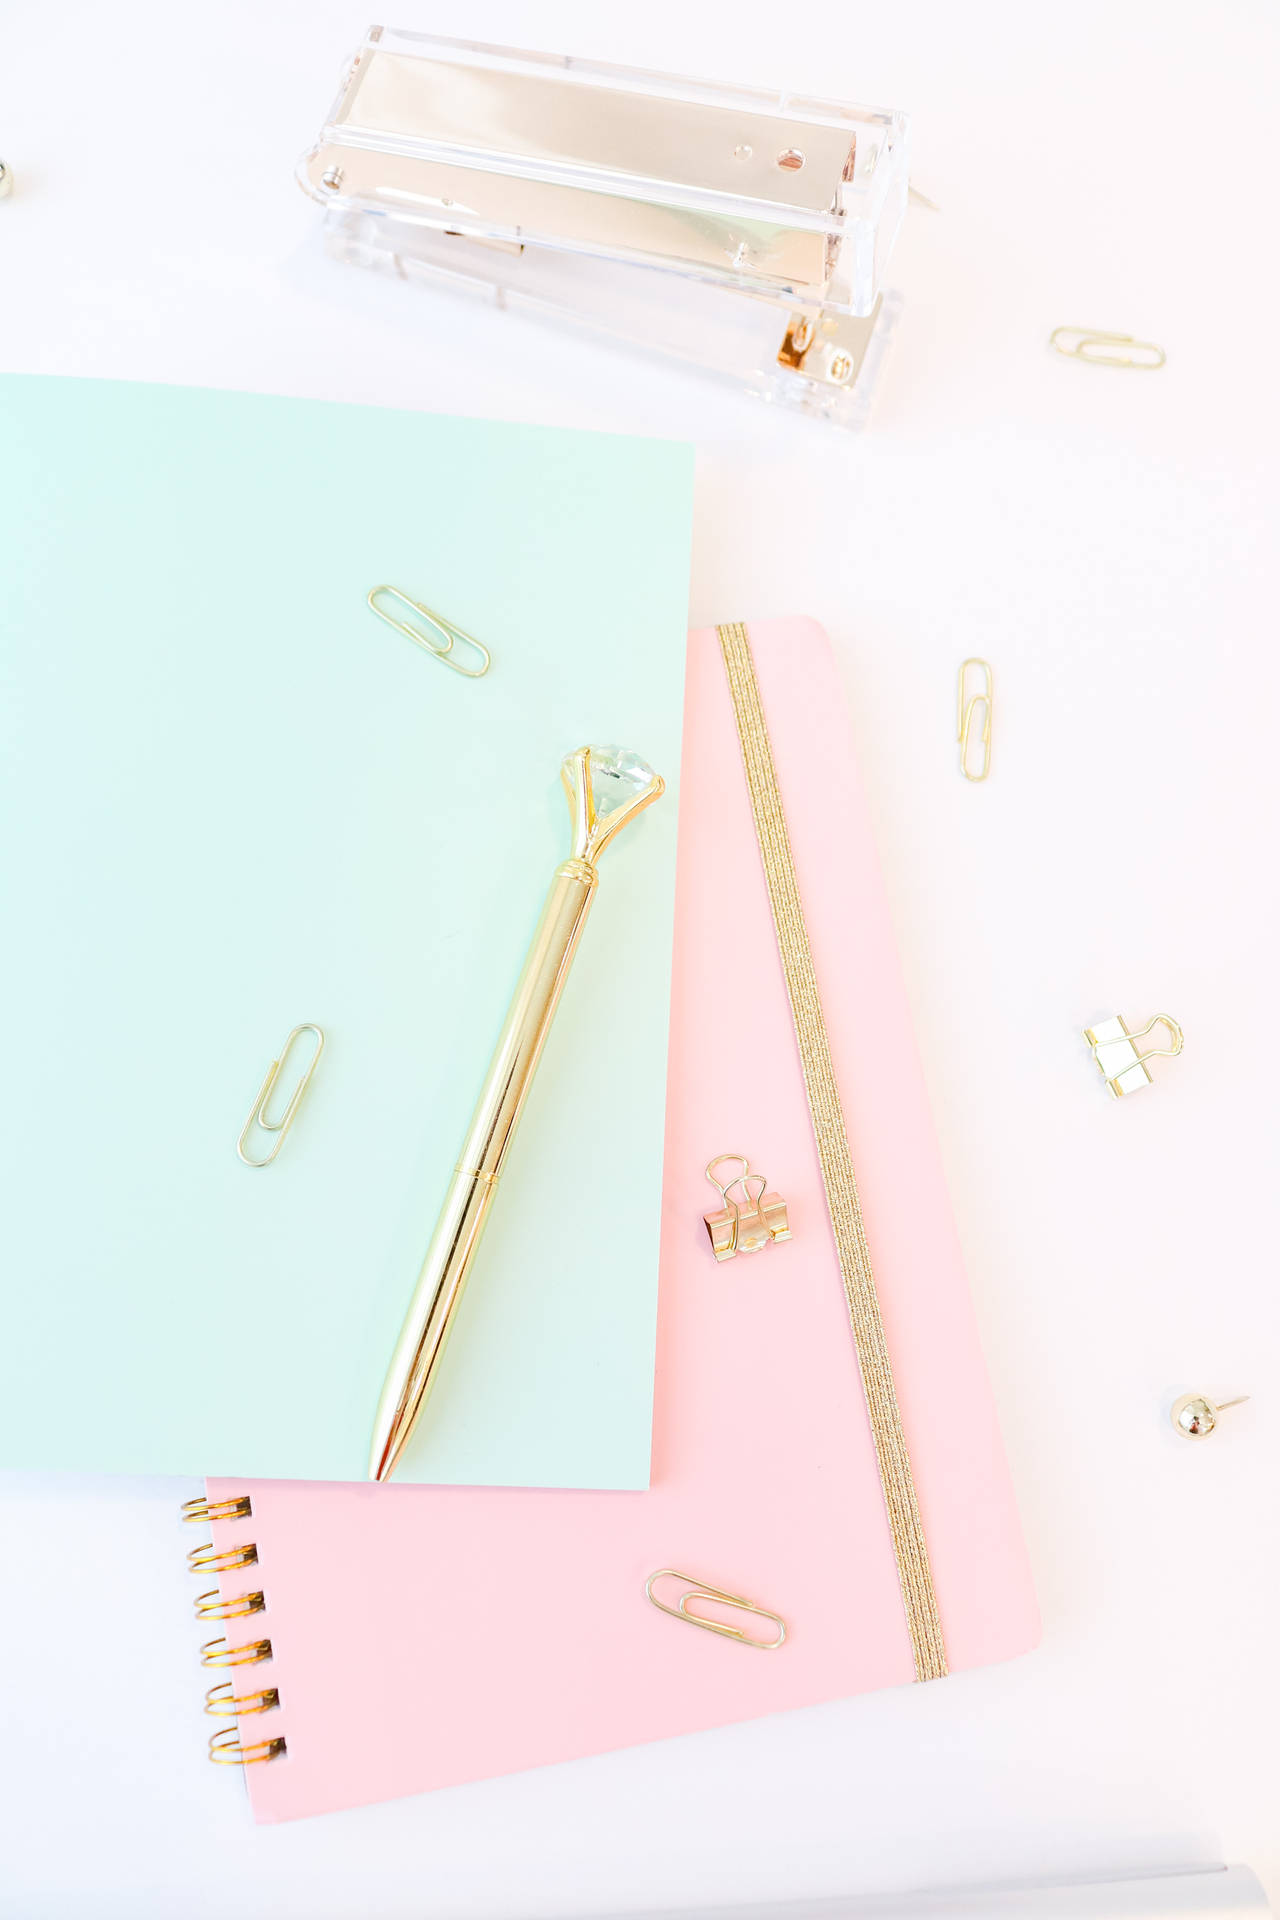 Girly Pink Aesthetic Pen And Notebook Background